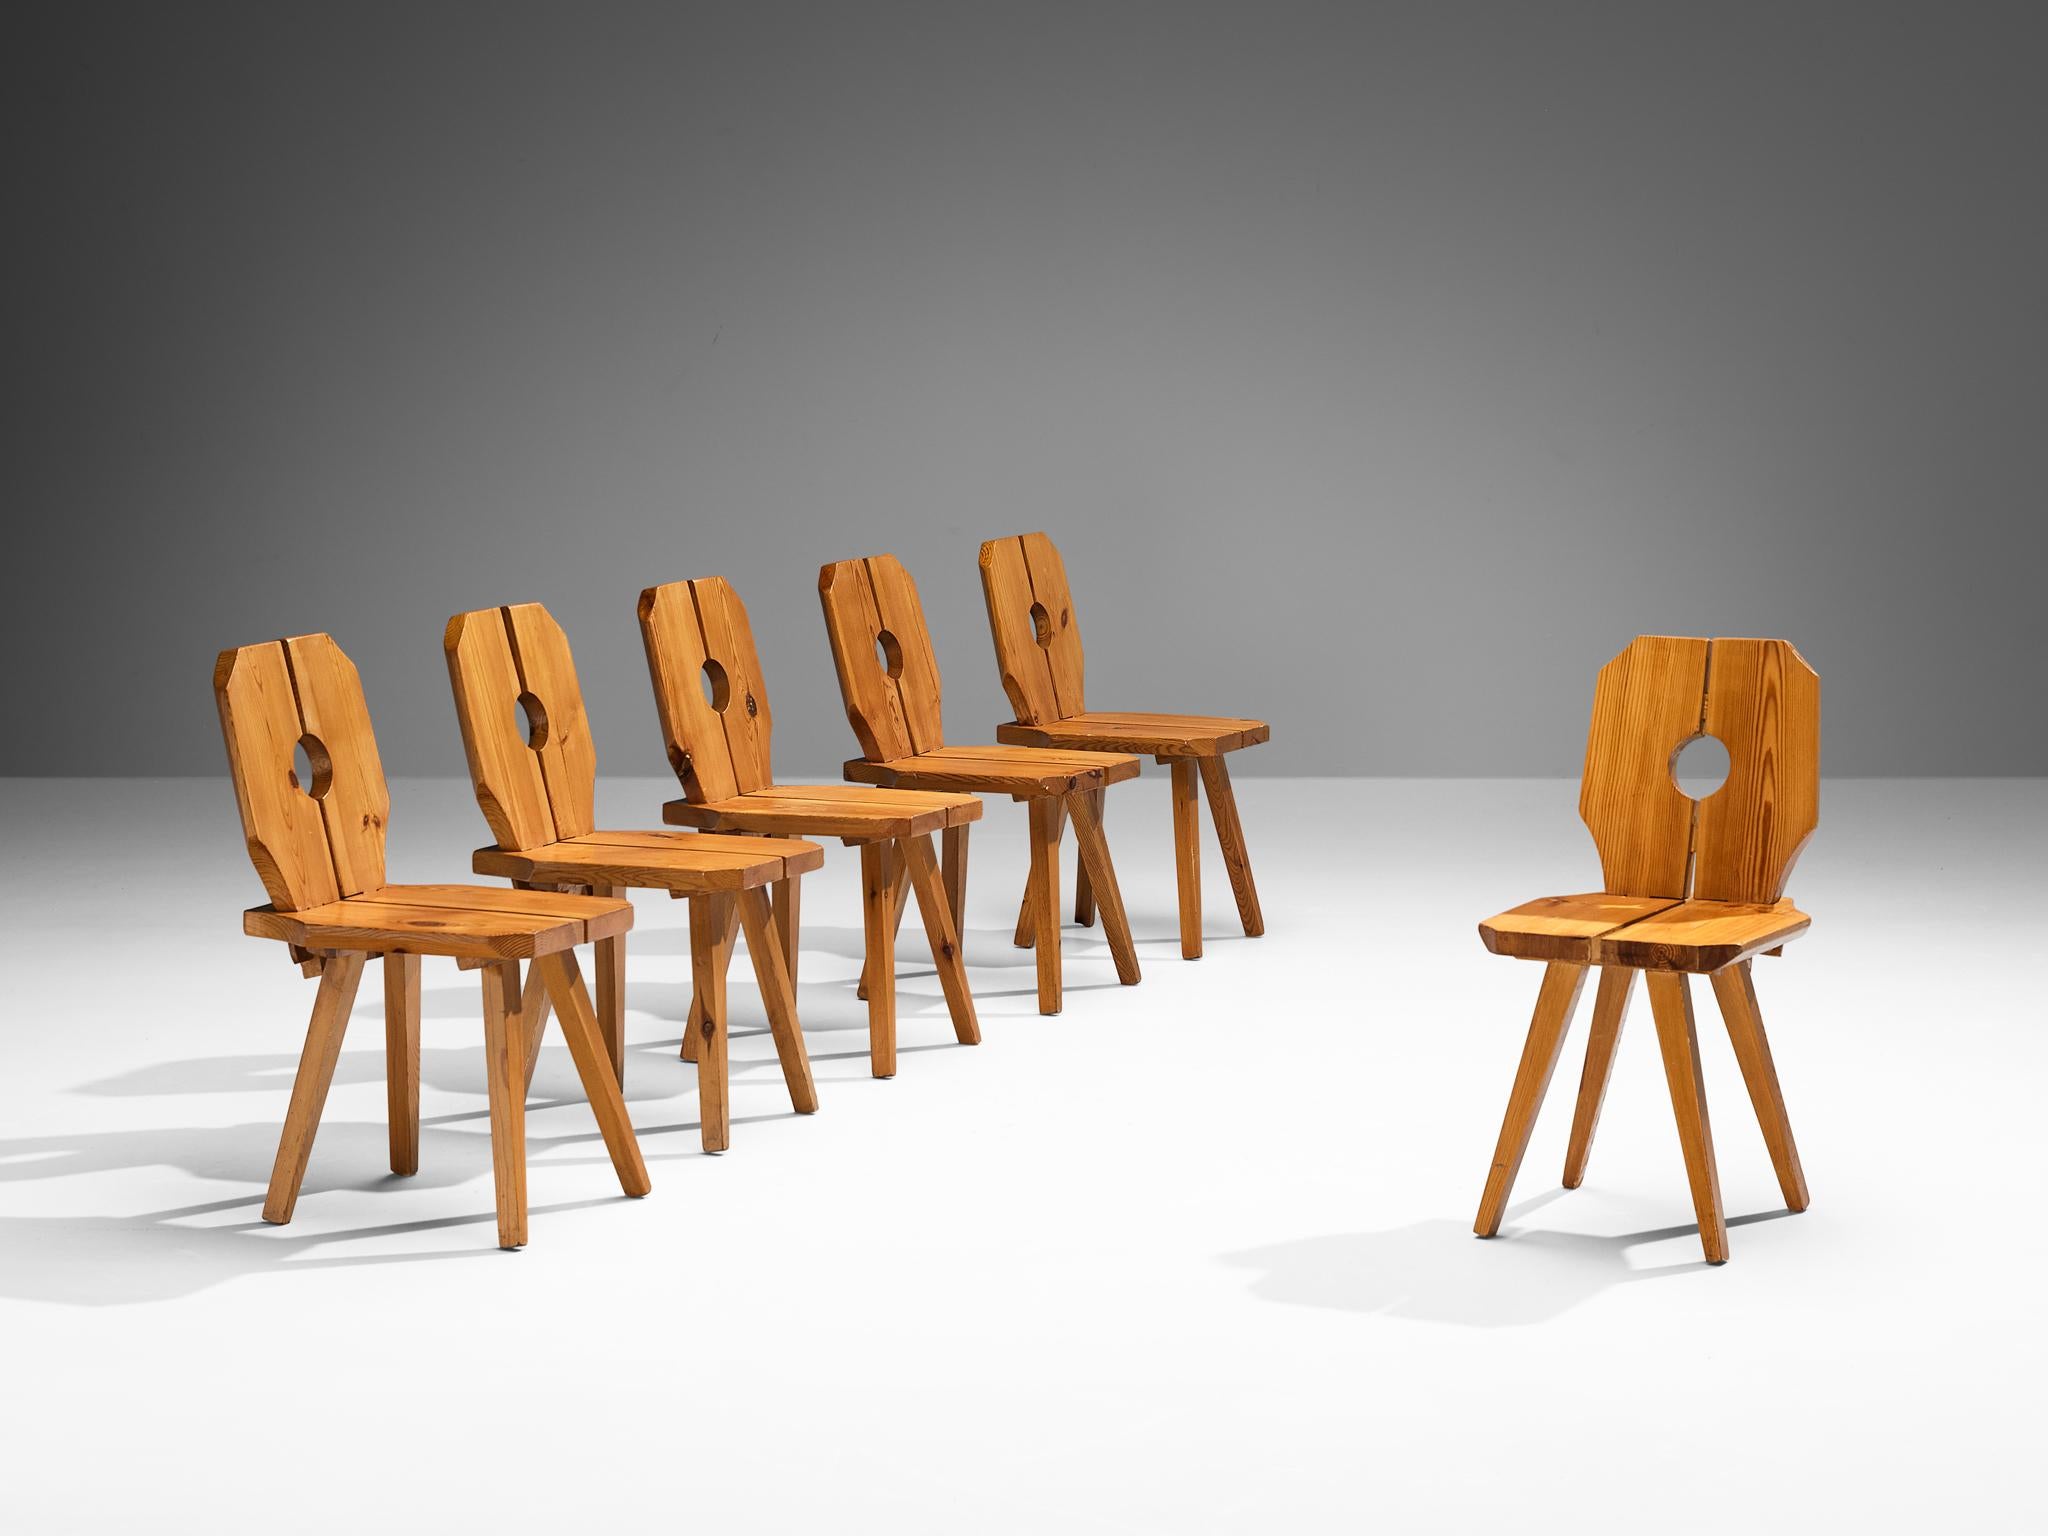 Set of six dining chairs, solid pine, Europe, 1960s

Sculpted dining chairs in expressively grained pine. Multiple features characterize the sculpted look of this set of twelve chairs. Firstly, the polygonal shaped backrest and seat that are parted